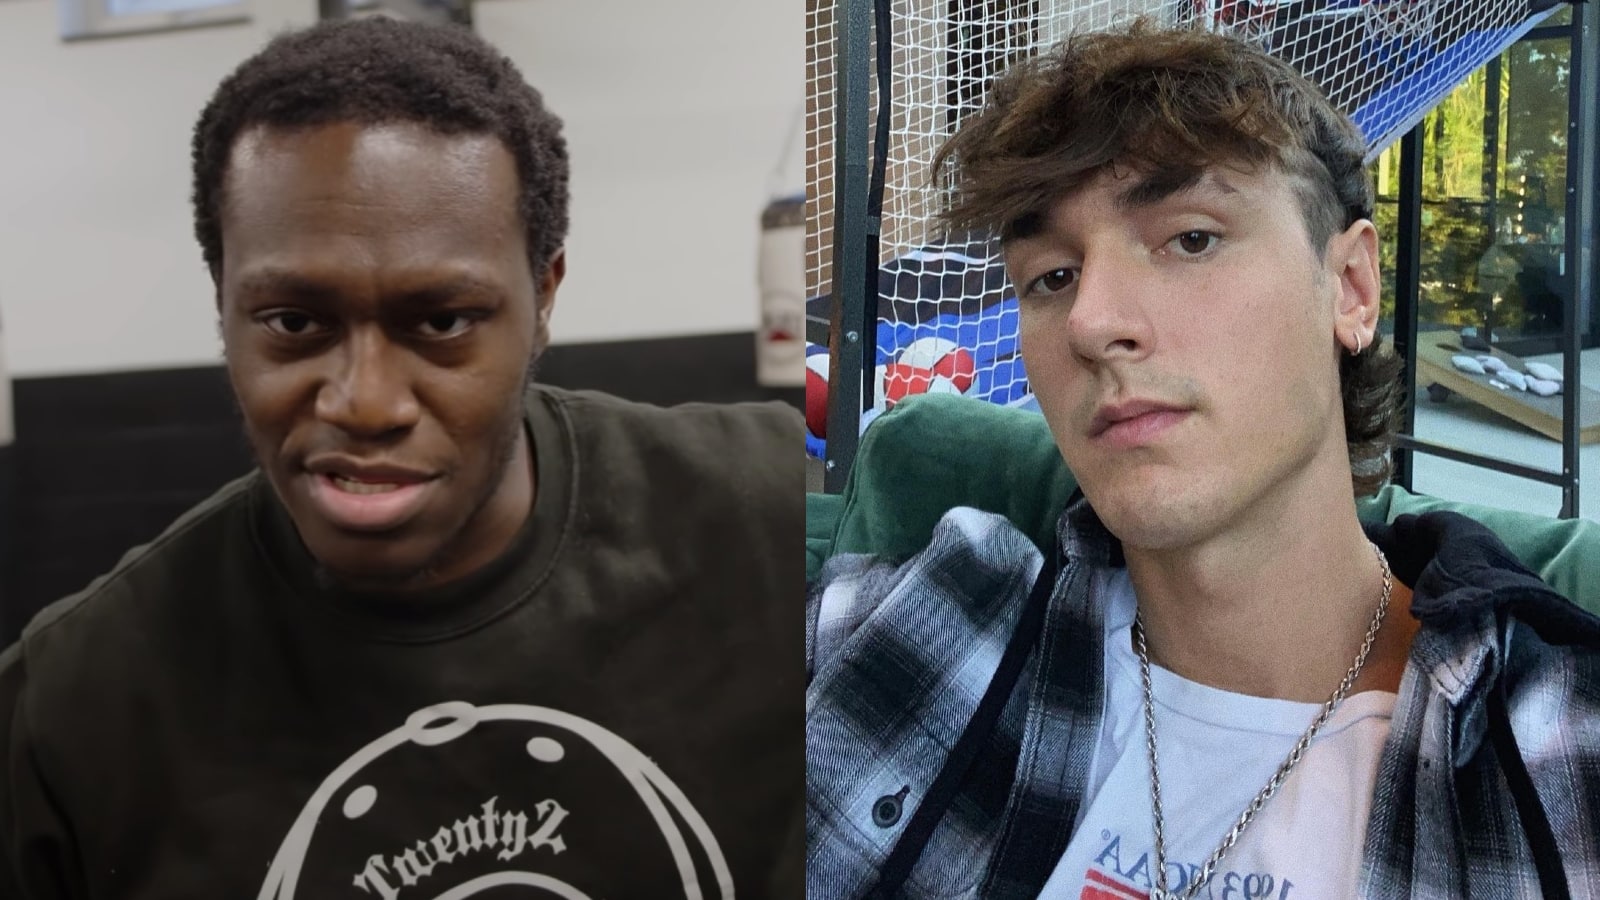 Deji accuses Bryce Hall of steroid use and responds to boxing challenge